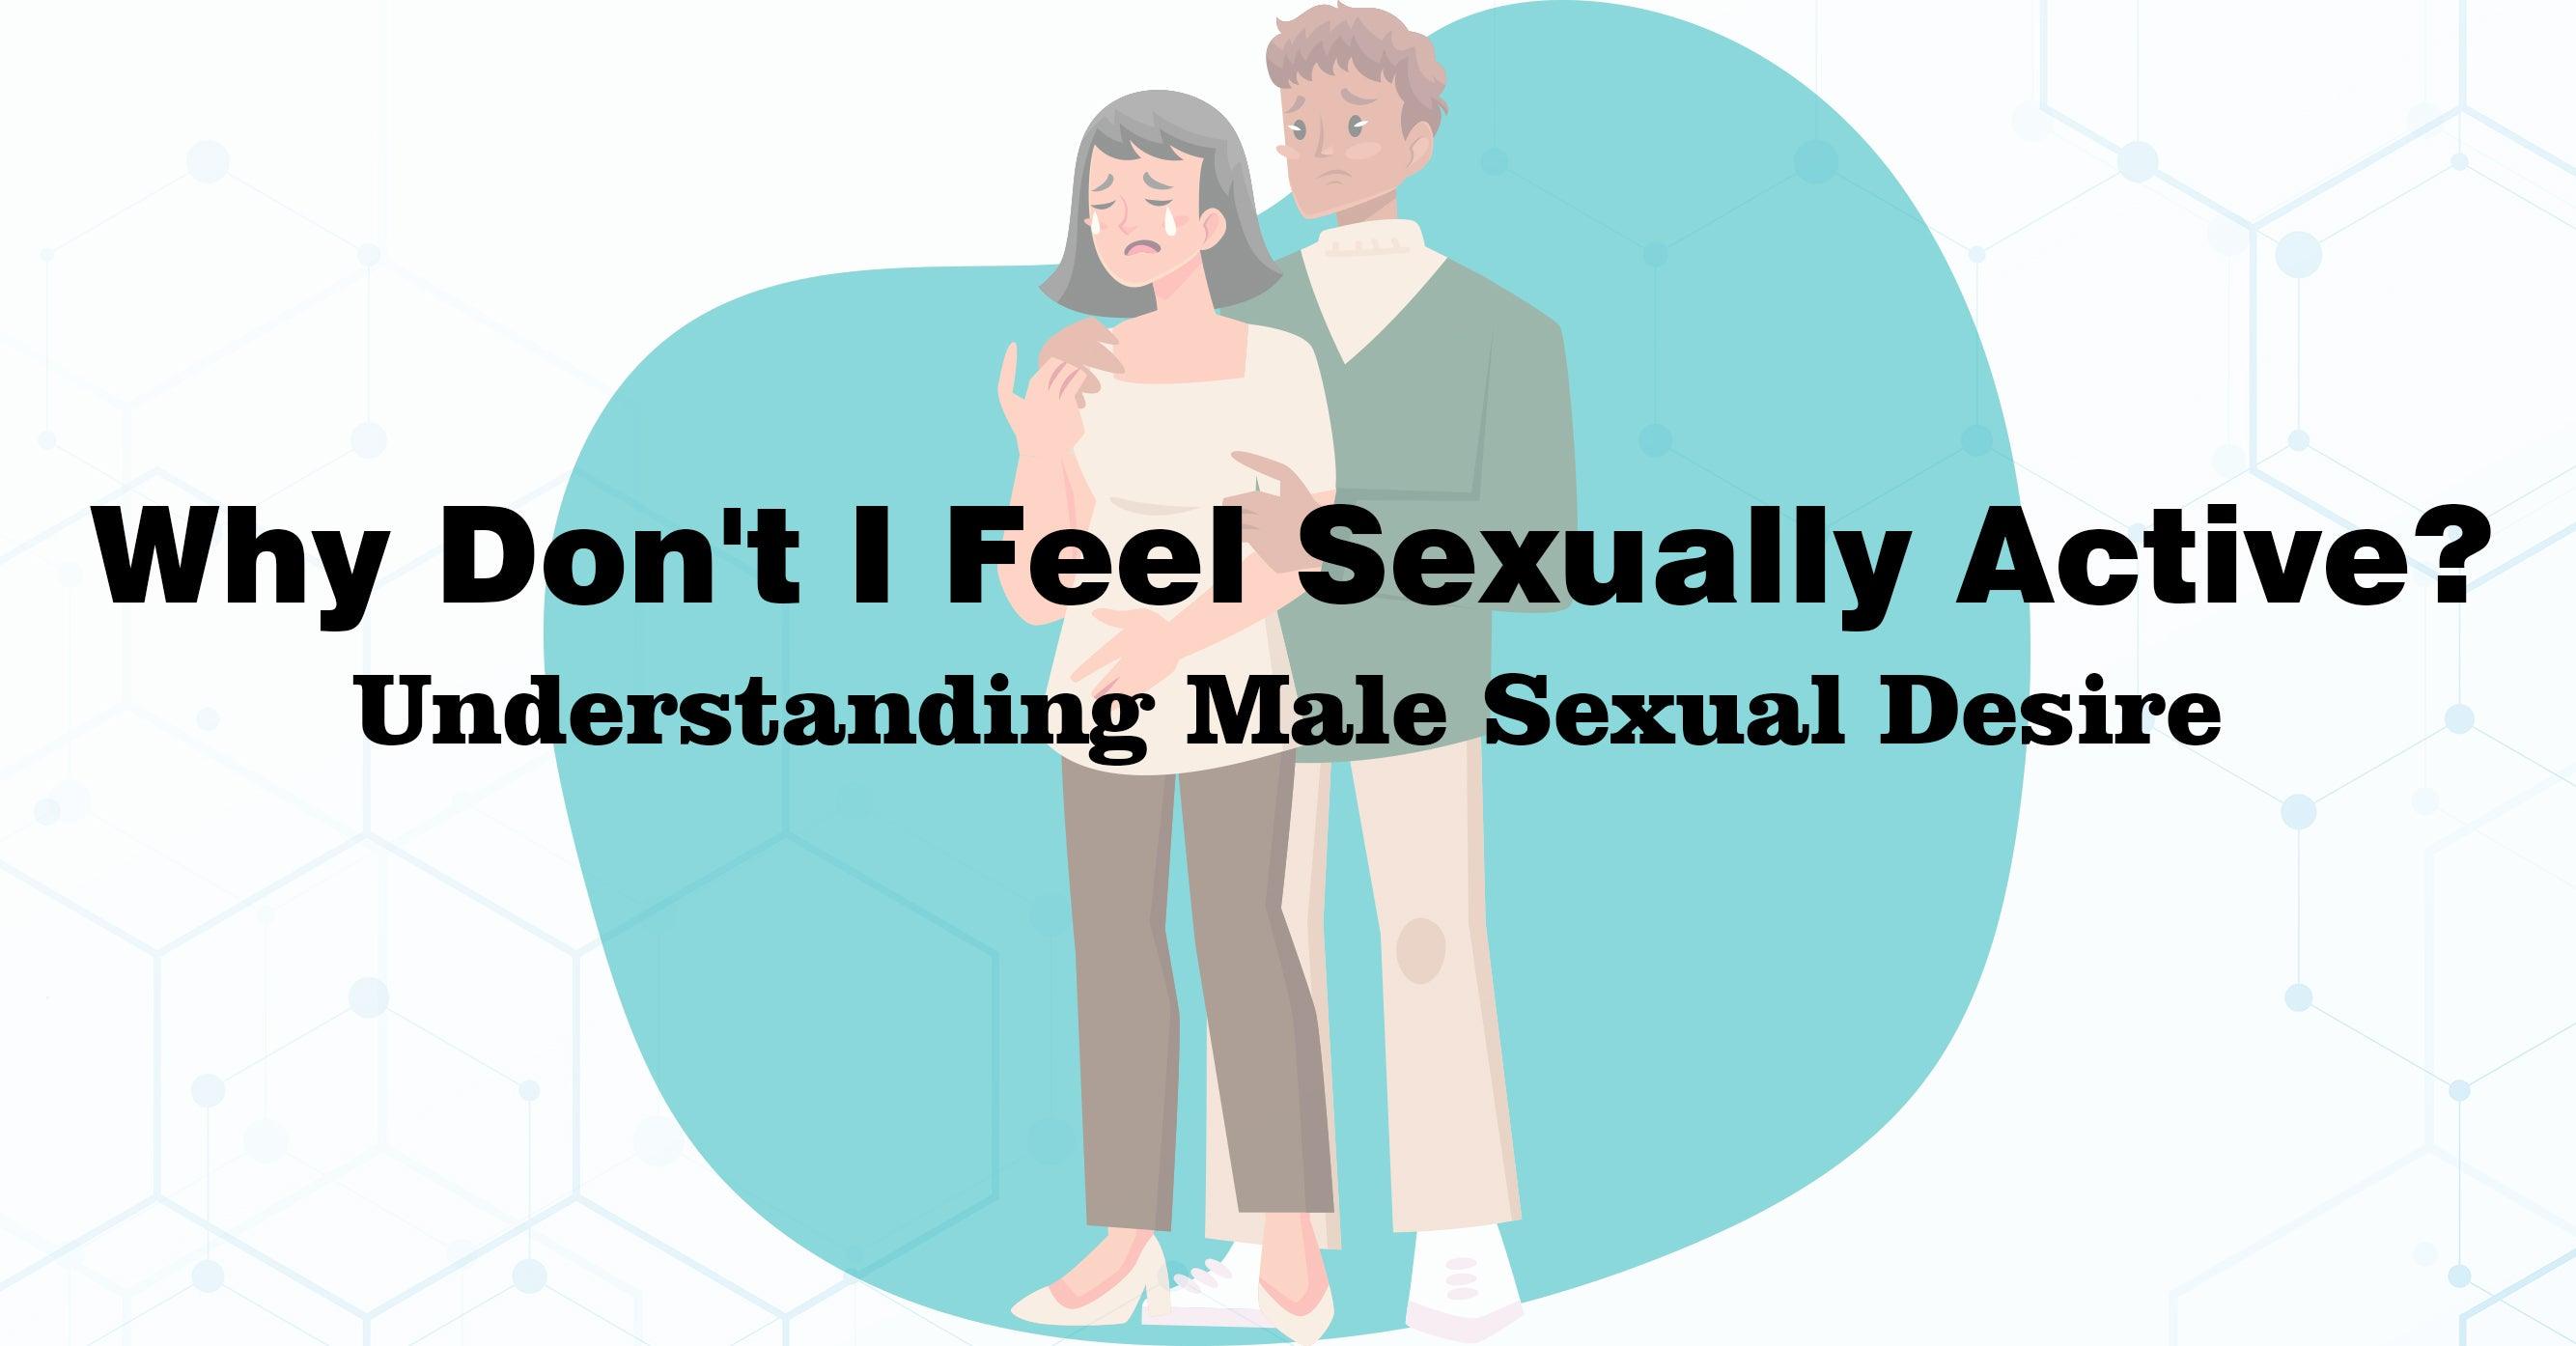 Why Don't I Feel Sexually Active? Understanding Male Sexual Desire